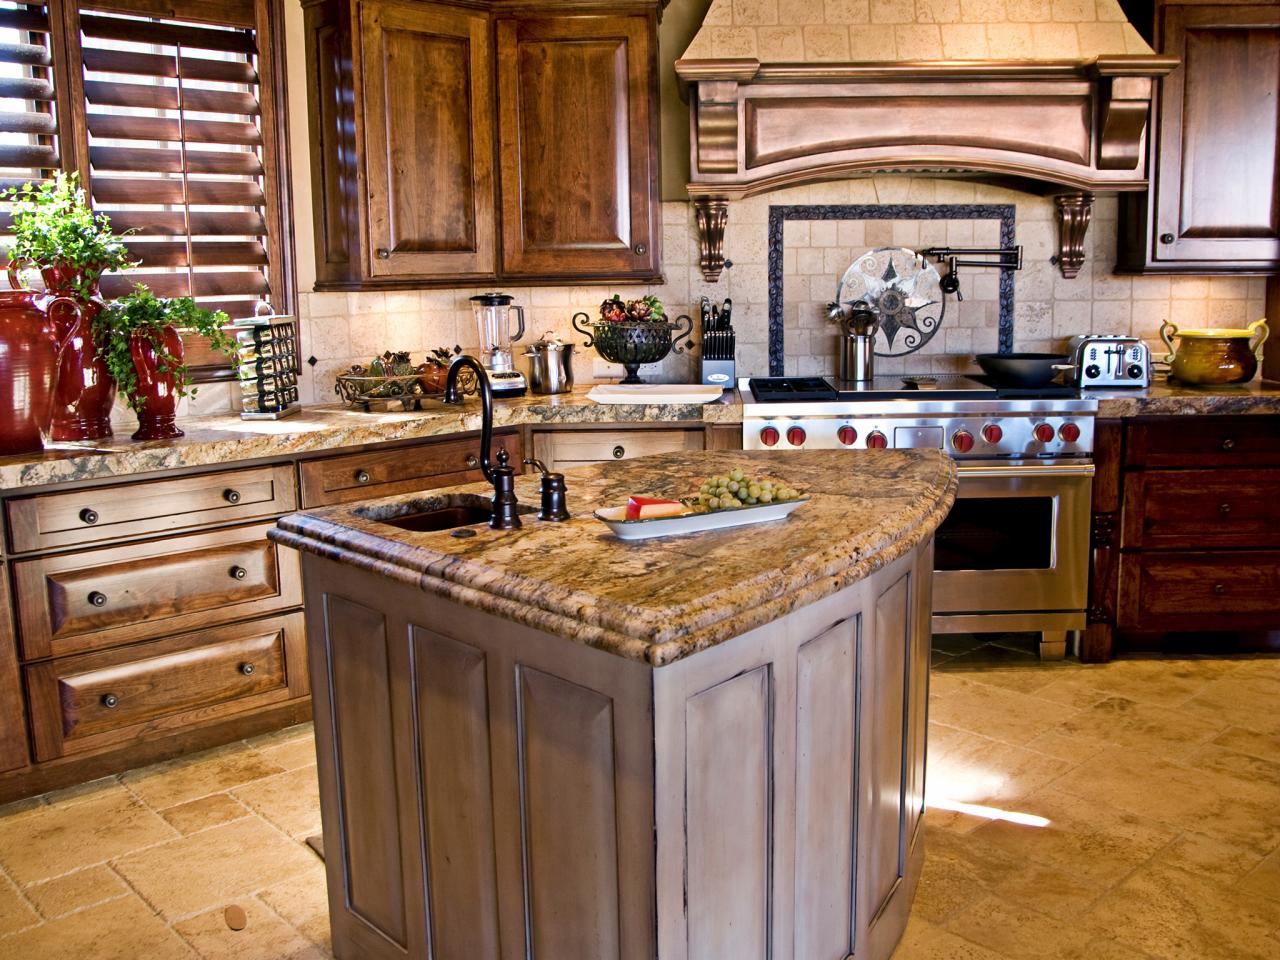 kitchen island designs custom islands bar layouts shape luxurious kitchens color breakfast cabinets seating layout functional remodel appliances hgtv interaction